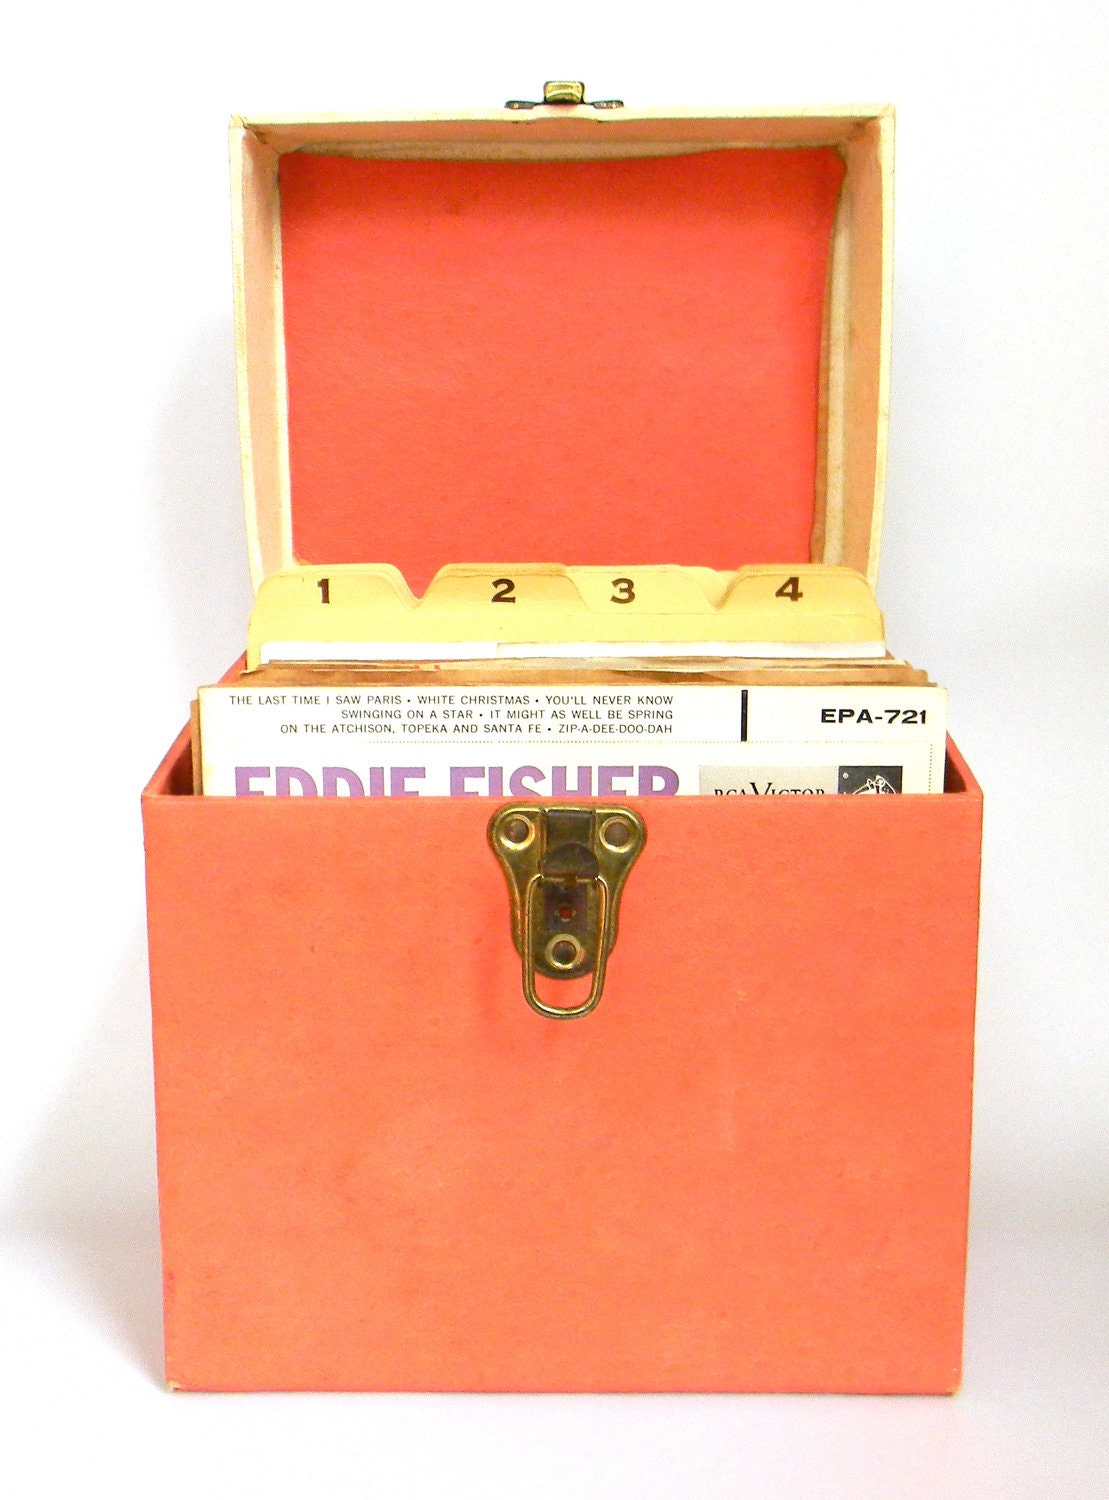 HUGE 45 record collection - vintage record box plus 53 records - DISCOUNTED